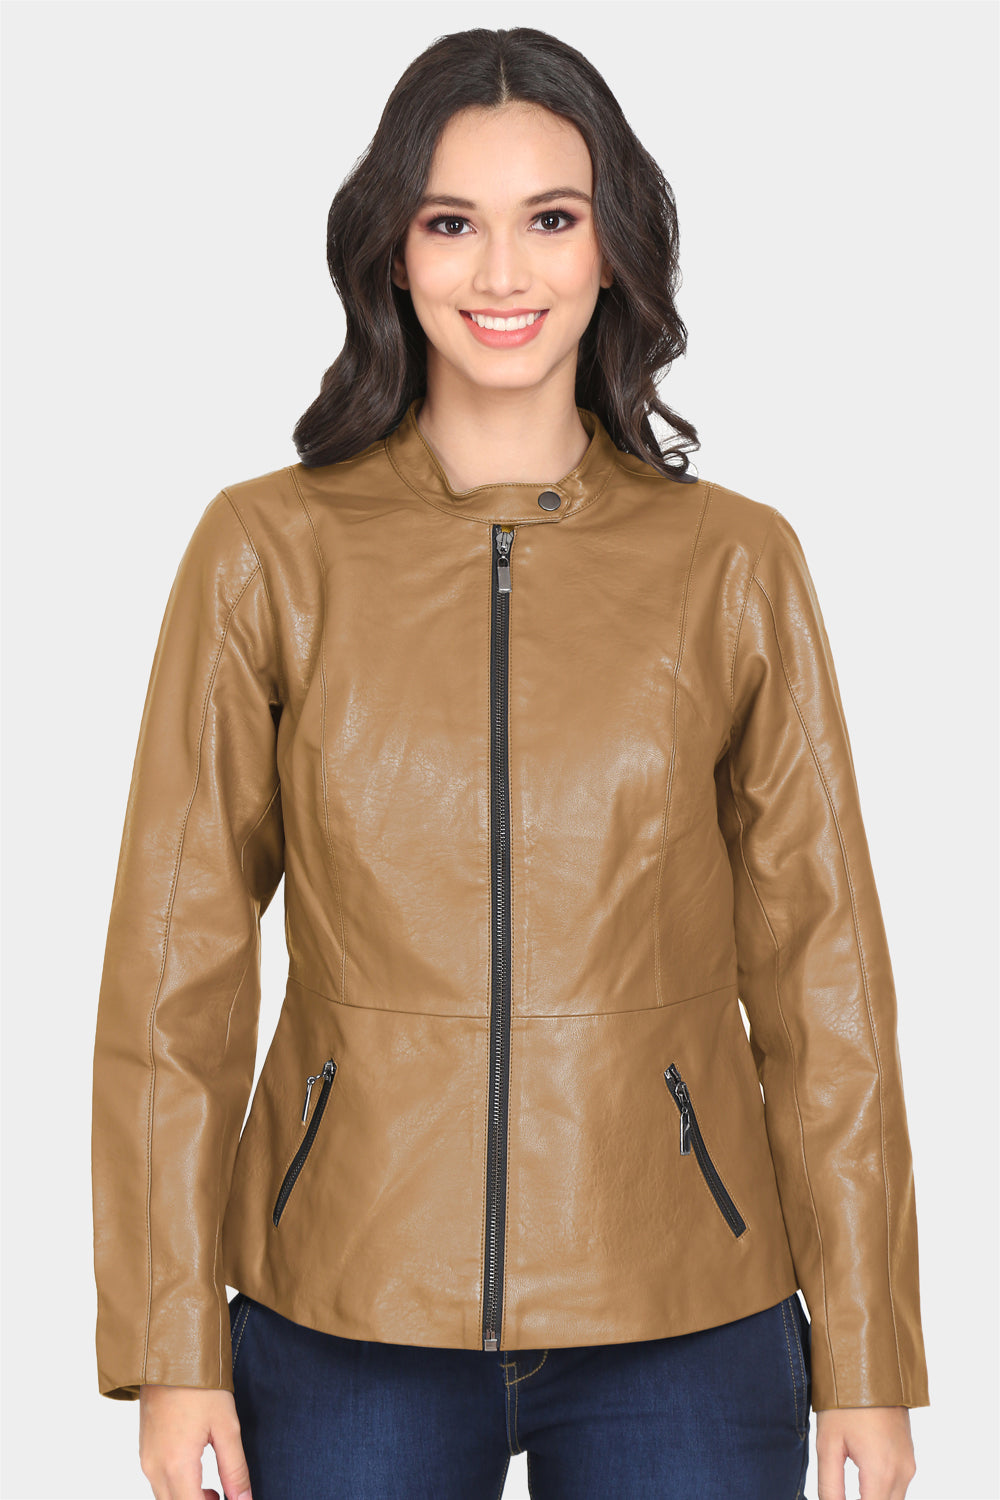 Justanned Almond Brown Leather Jacket